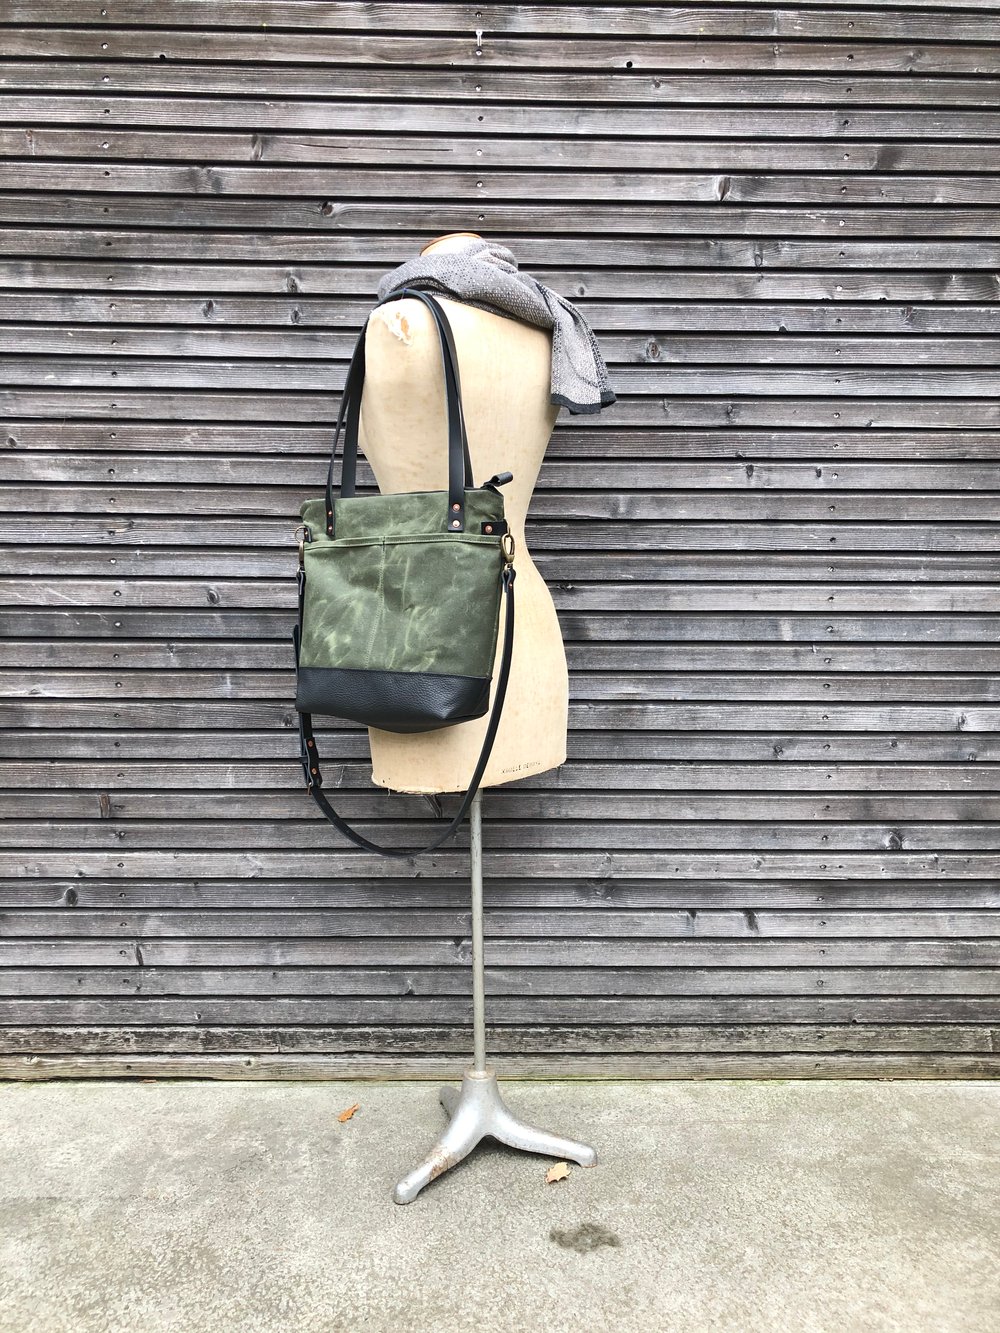 Handmade crossbody bags, totes, and wallets made from waxed canvas